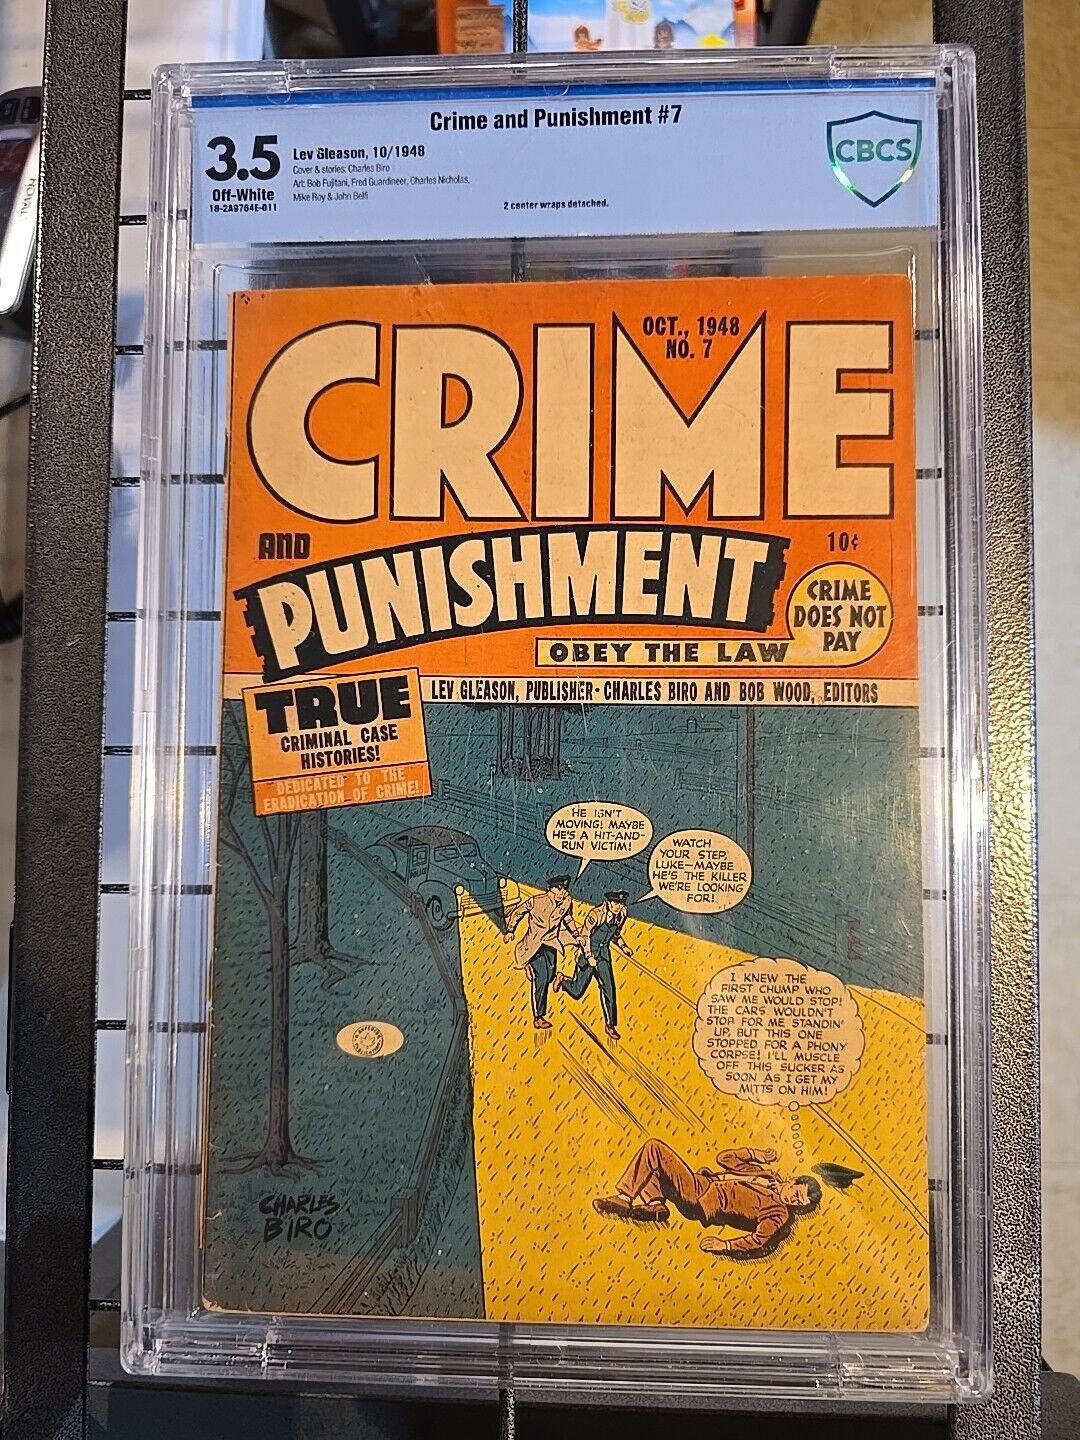 CRIME AND PUNISHMENT #7 CBCS 3.5 OCTOBER 1948 LEV GLEASON